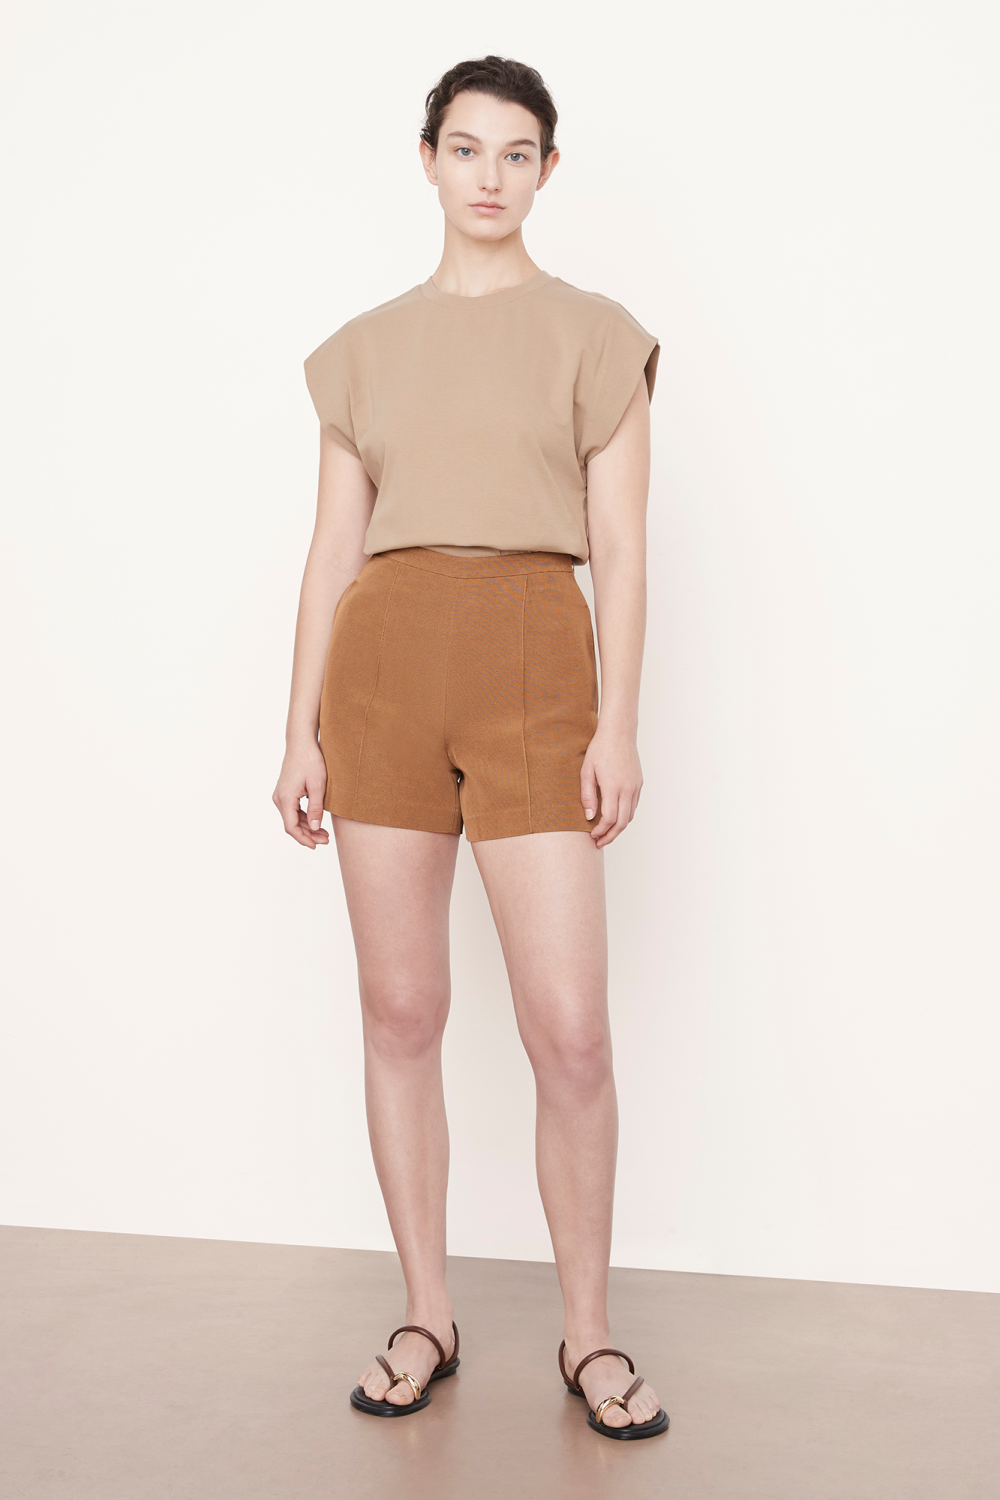 The High-Waisted Tailored Short from Vince is made with high-quality Italian cotton-blend ottoman, offering a luxurious feel while sitting high at the waist.